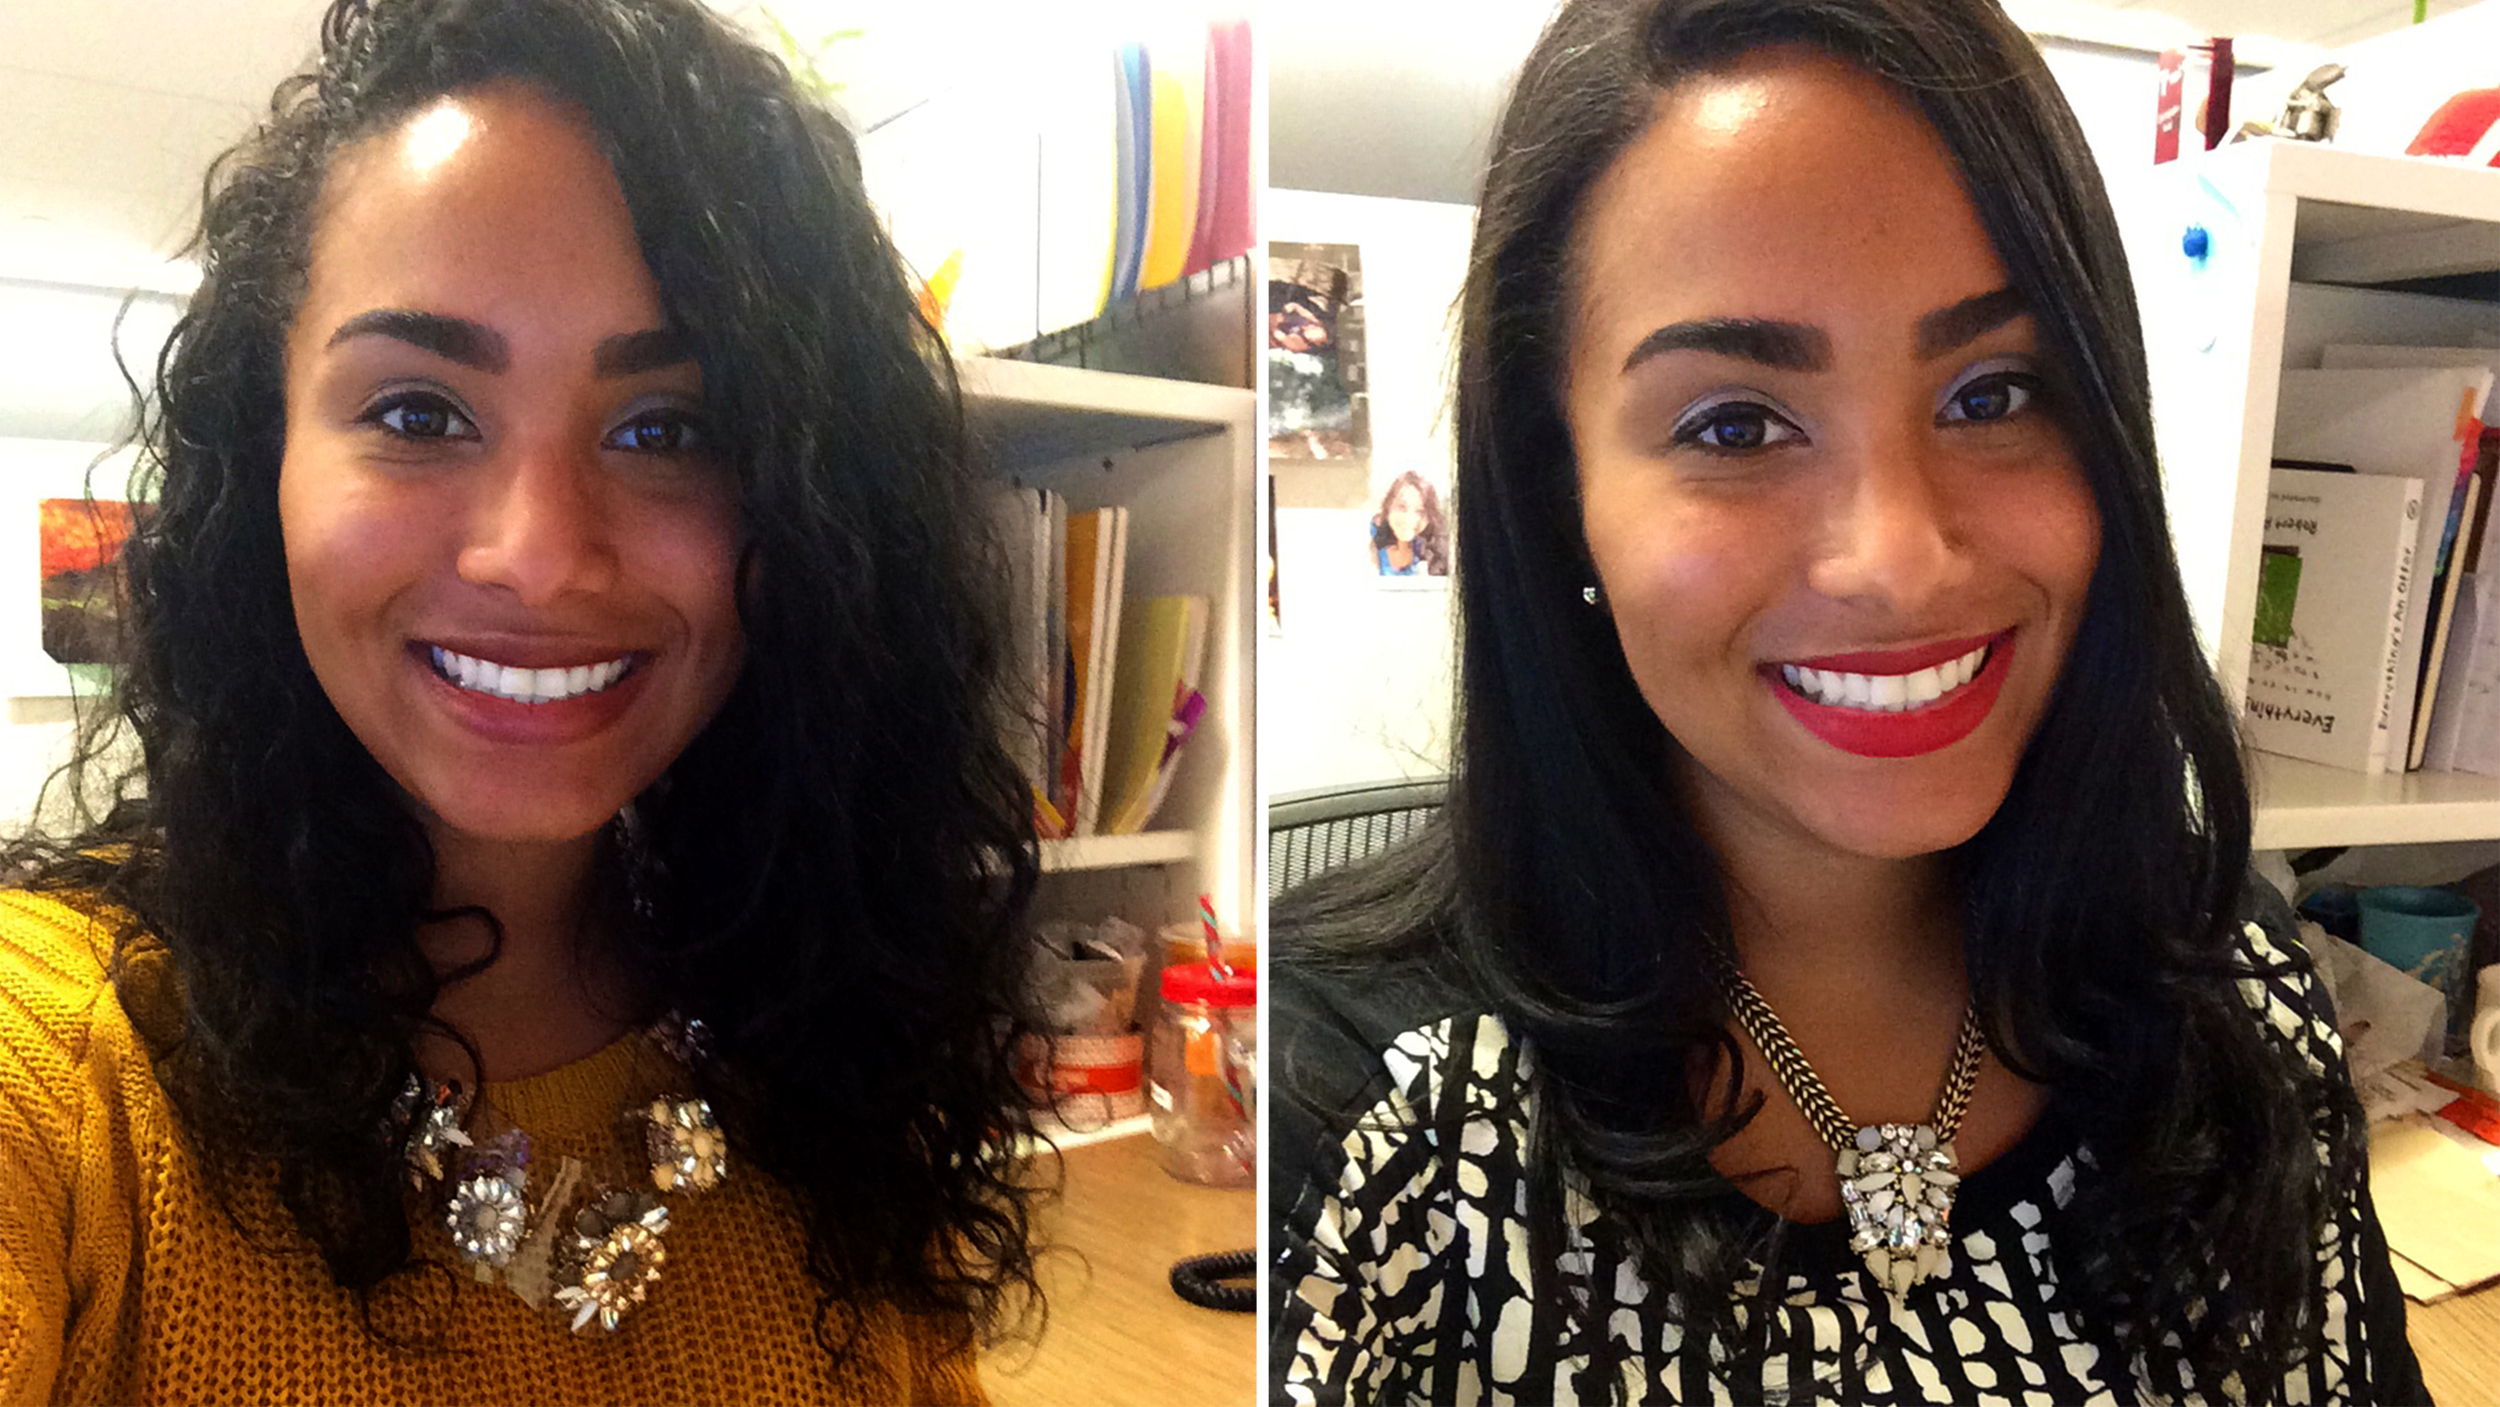 Curlpower Women Switch From Curly To Straight Hairstyles To Test Reactions